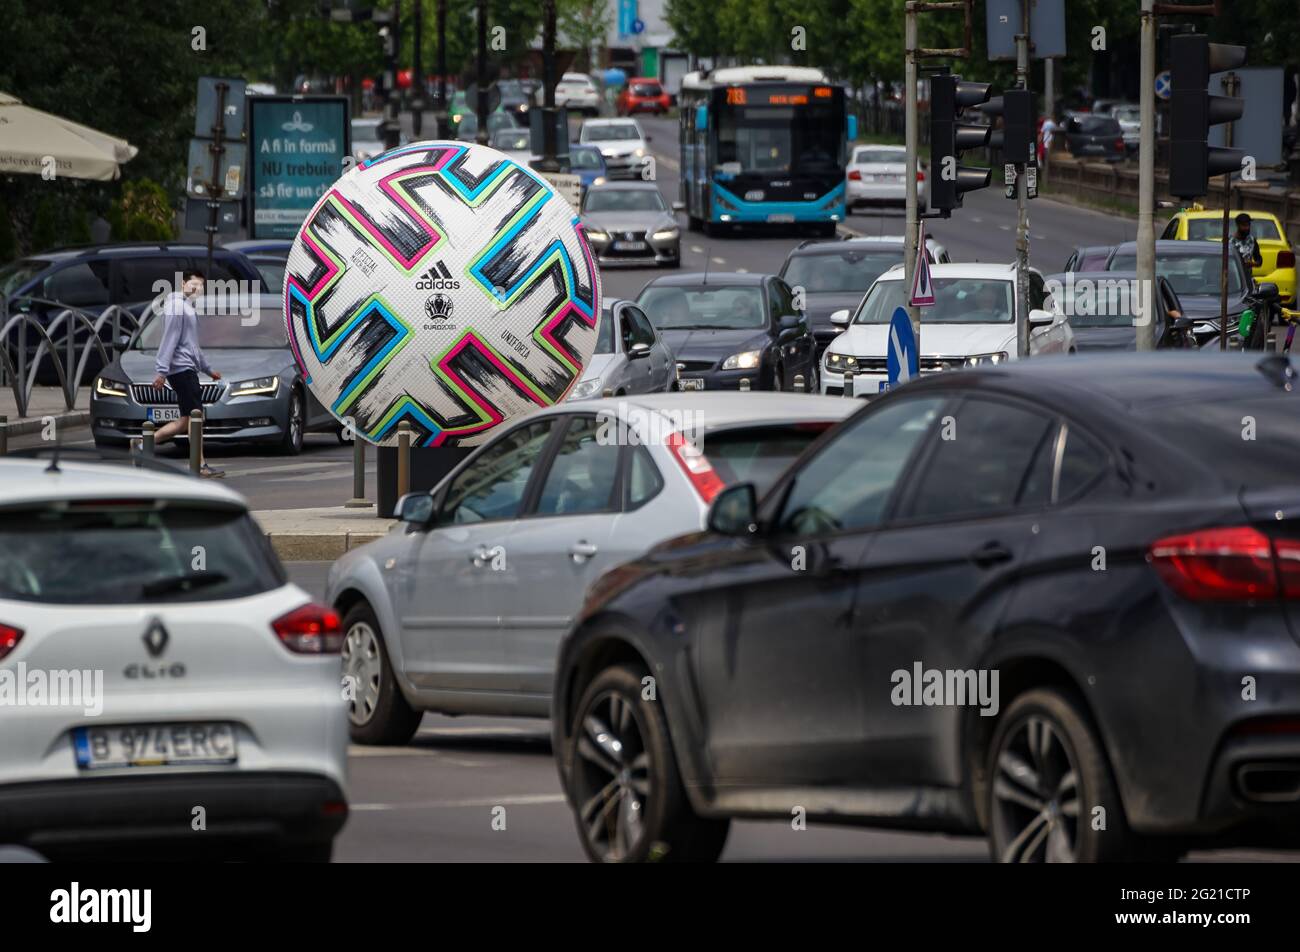 Bucharest, Romania - June 06, 2021: An official giant UEFA EURO 2020 match ball is presented in a large intersection of Bucharest. Stock Photo